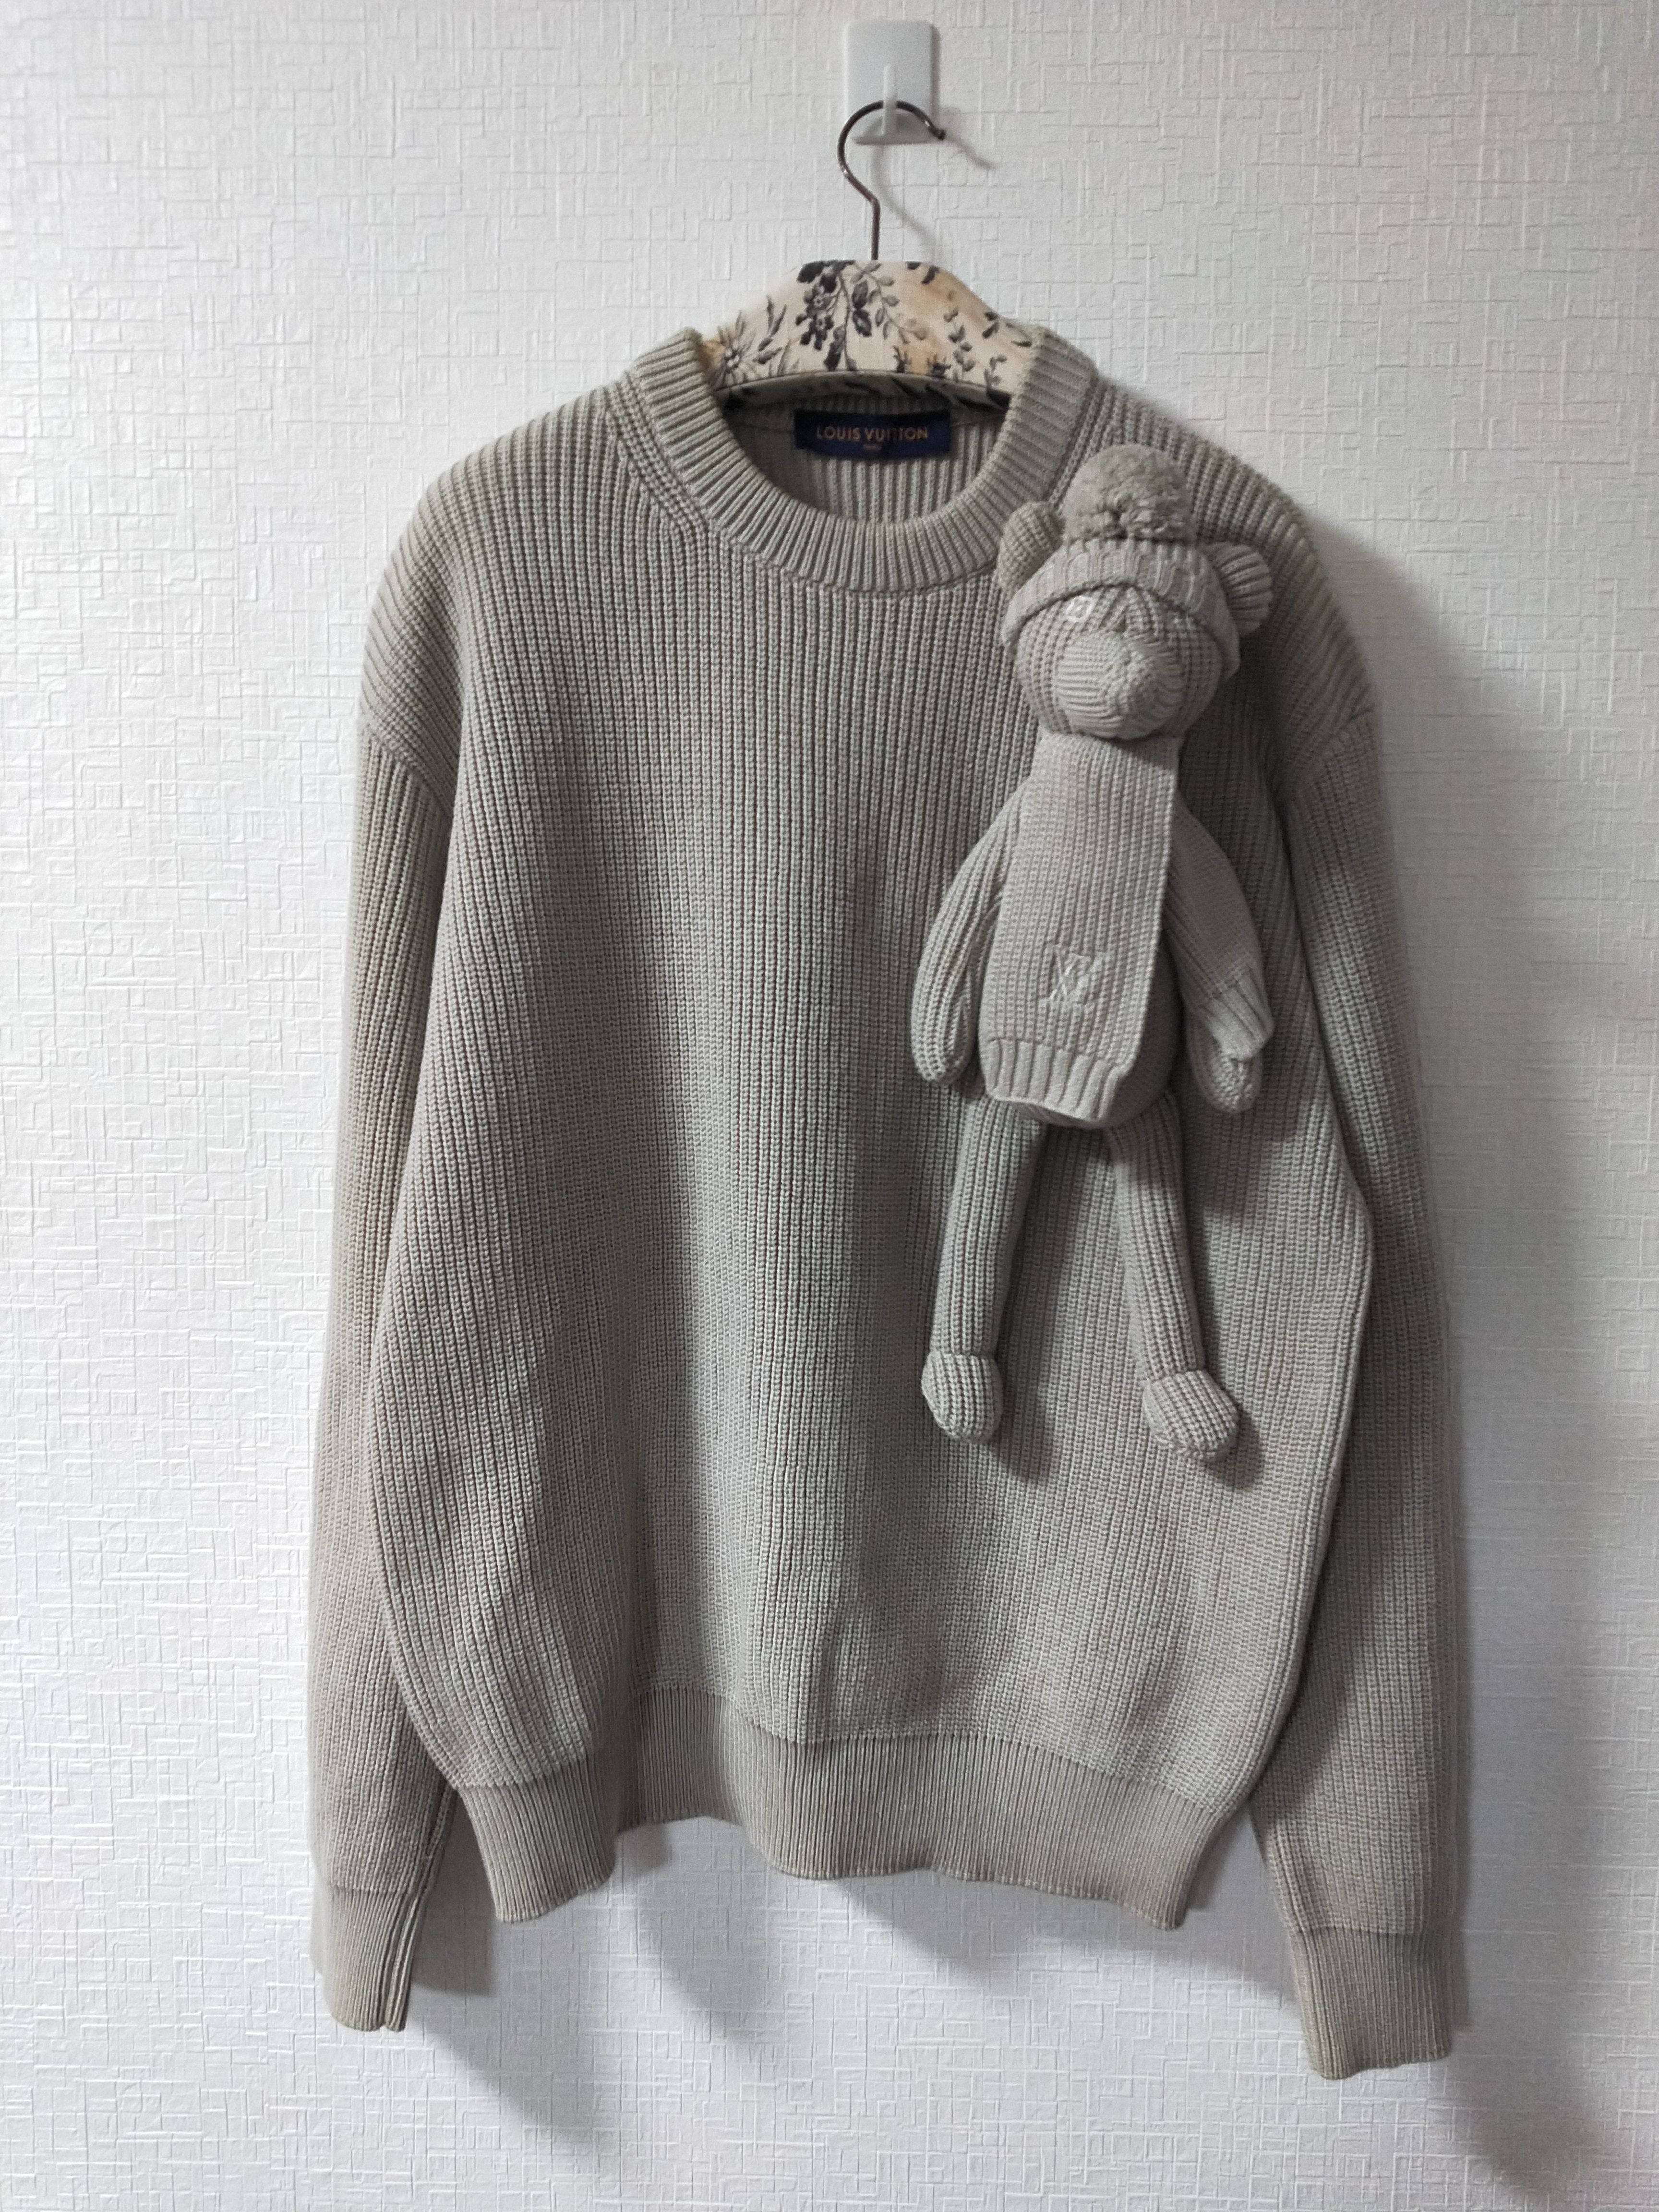 Louis Vuitton 3D Knitted Set Grey Cashmere knitted. Size 6 Months